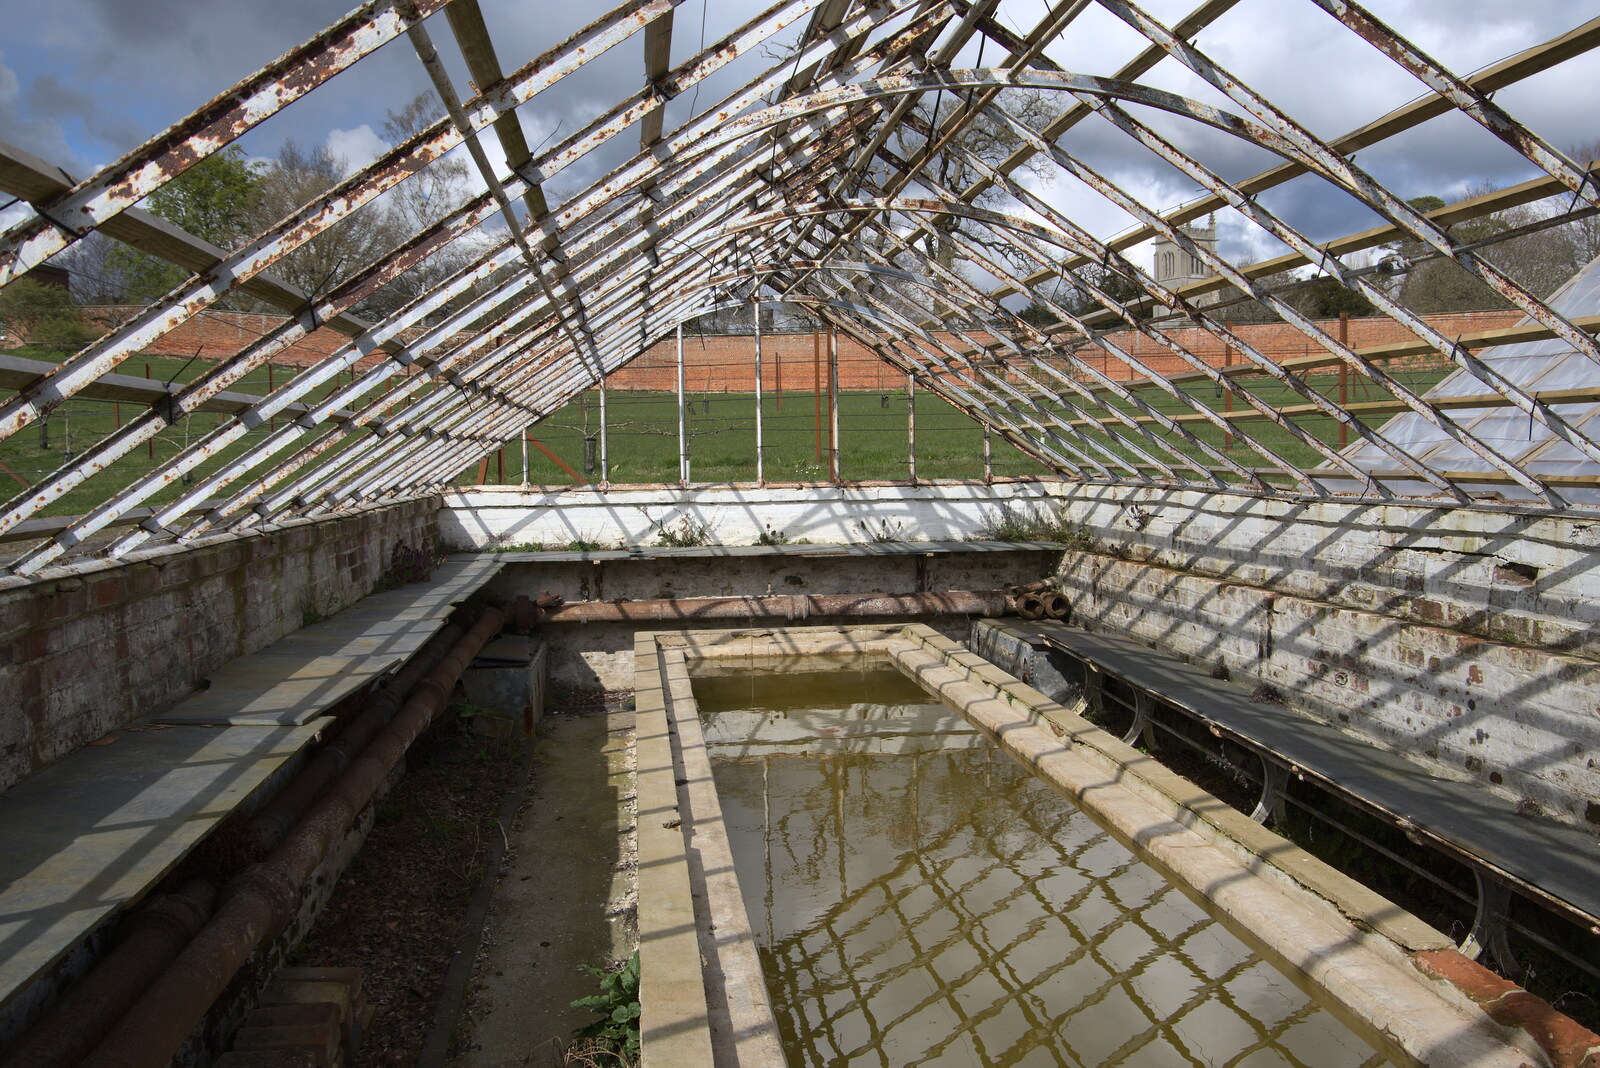 The skeleton of a greenhouse from A Return to Ickworth House, Horringer, Suffolk - 11th April 2021